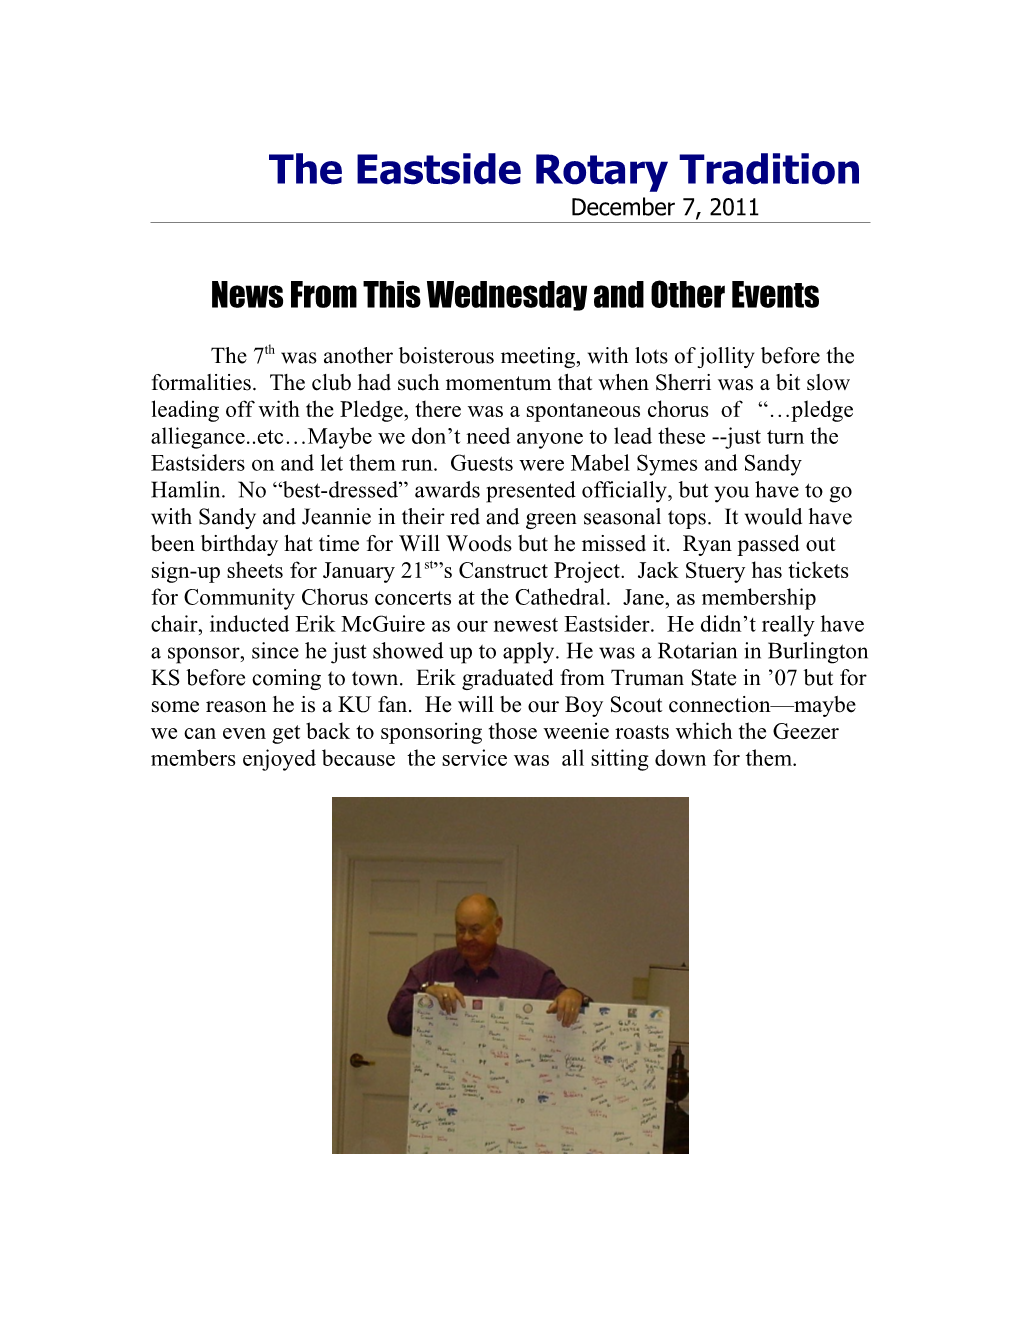 The Eastside Rotary Tradition s2